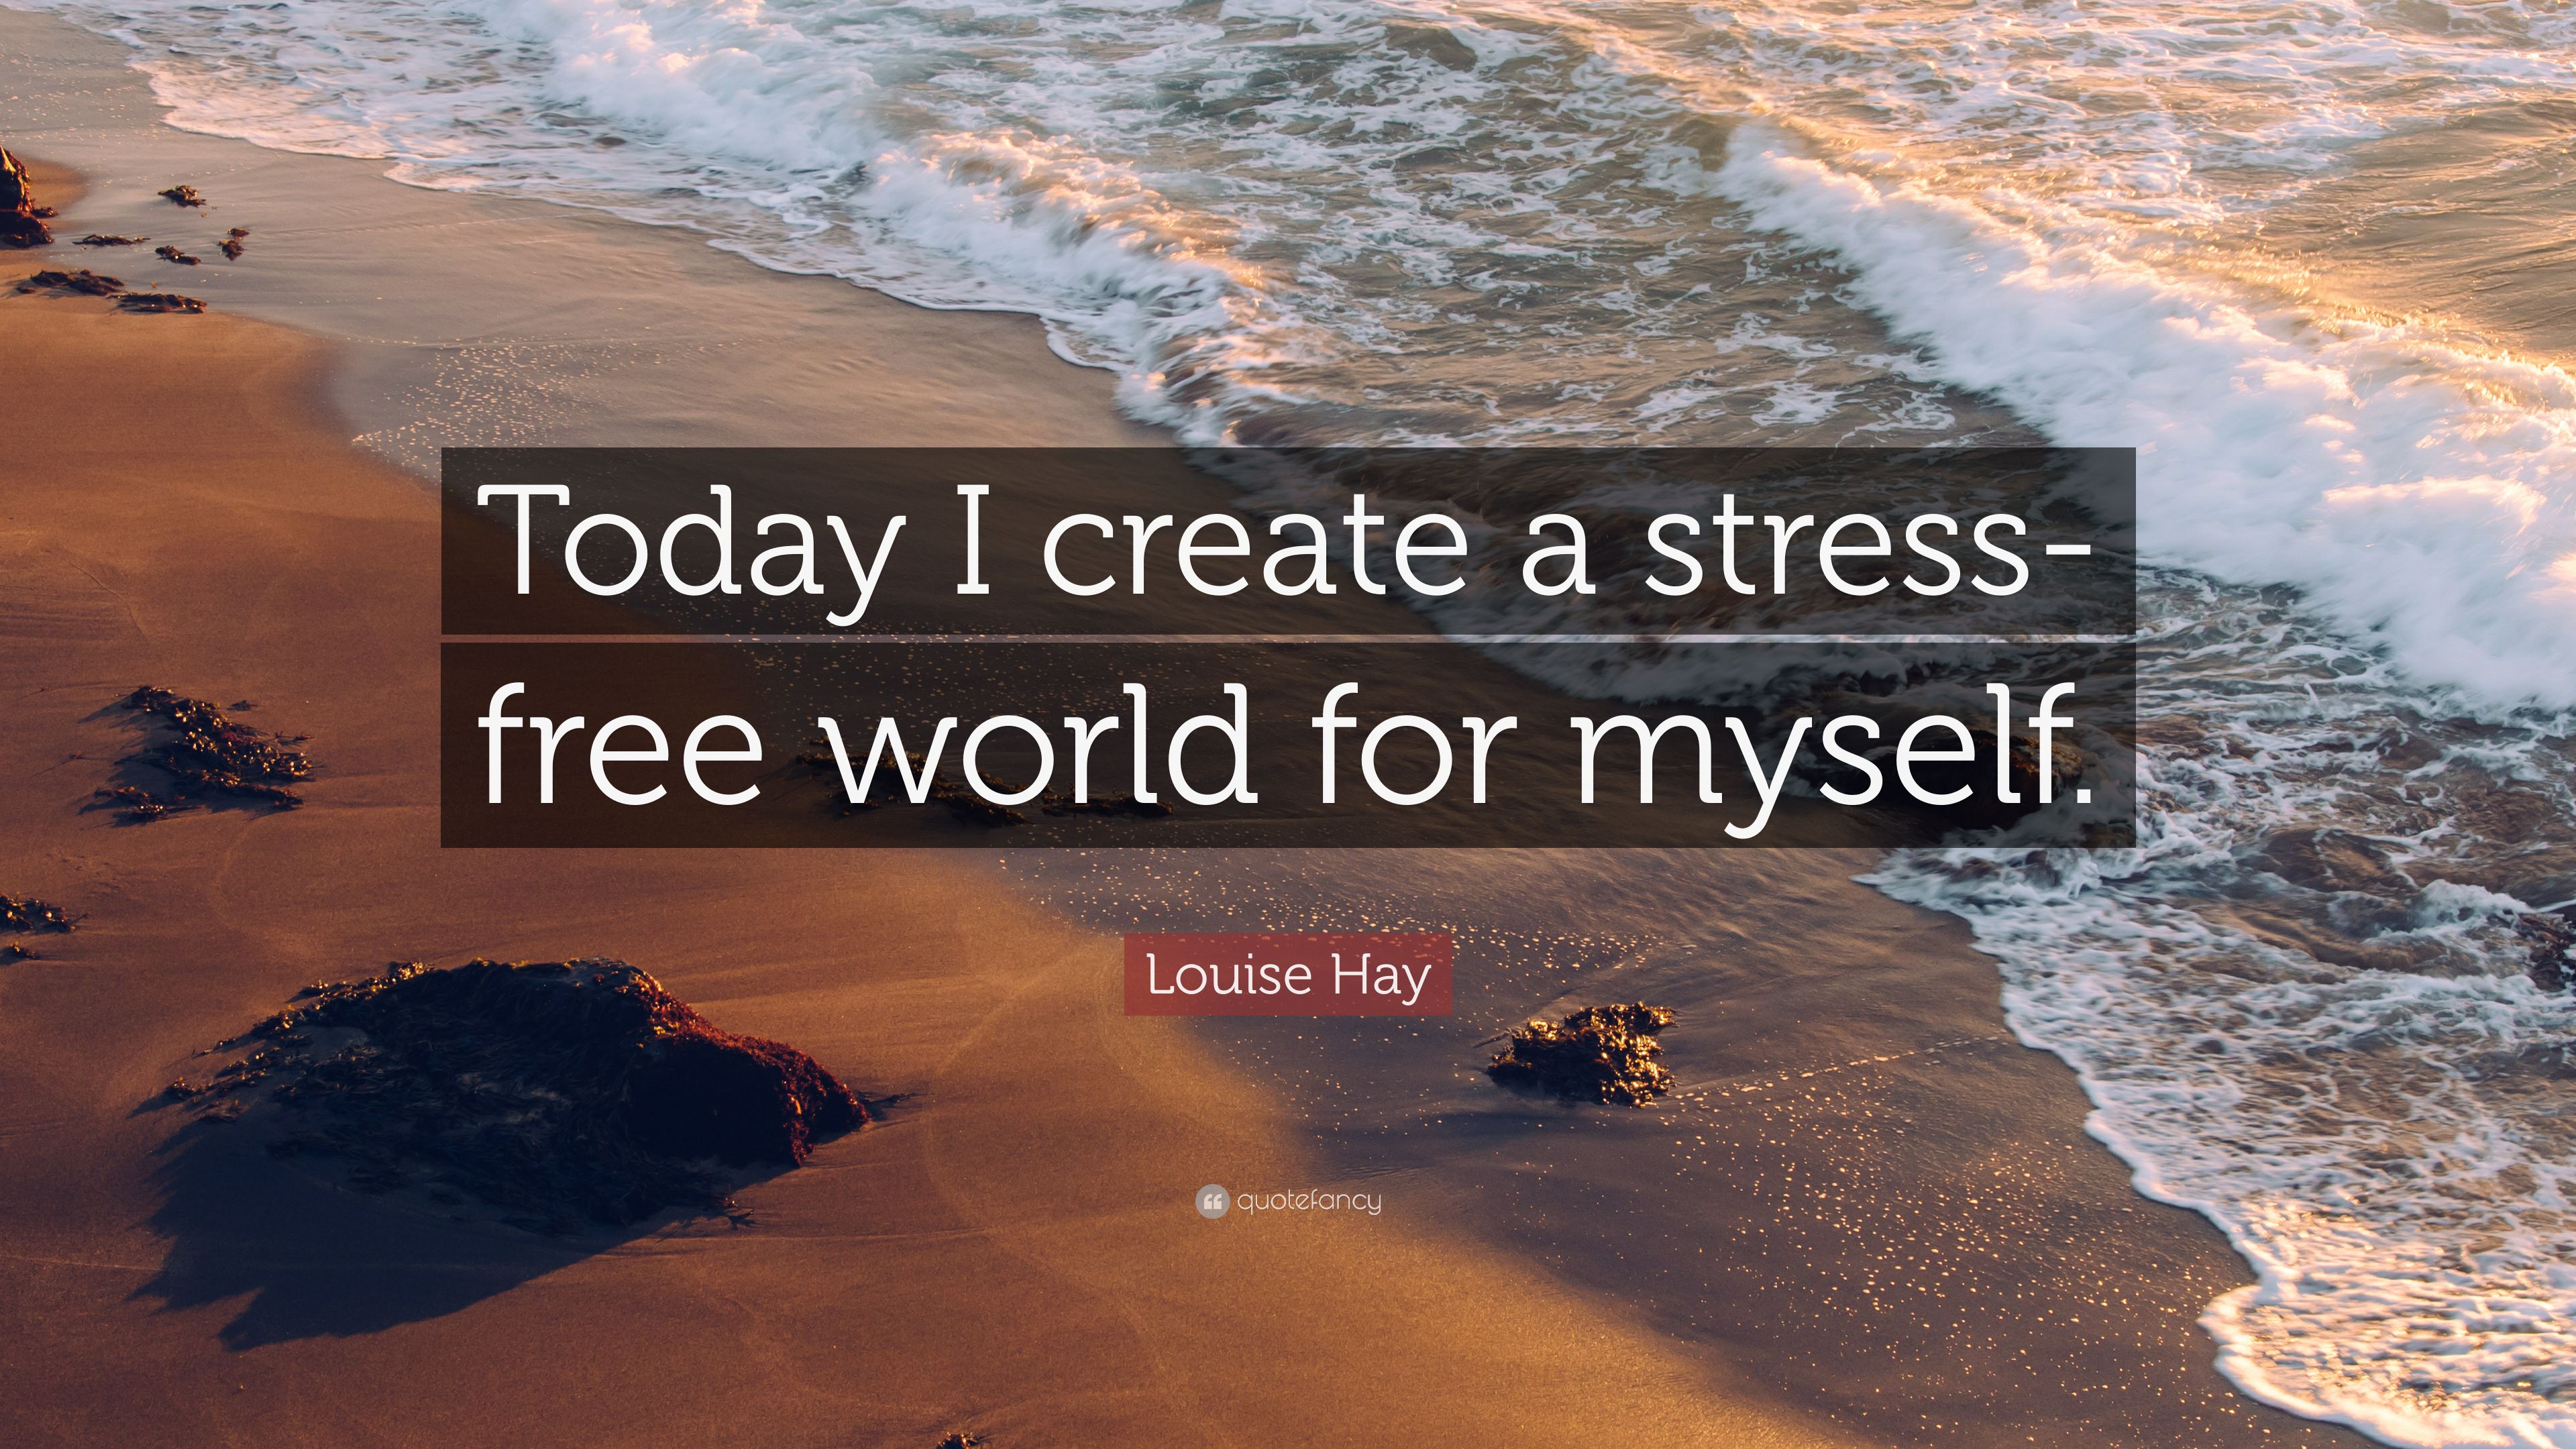 Louise Hay Quote: “Today I Create A Stress Free World For Myself.”